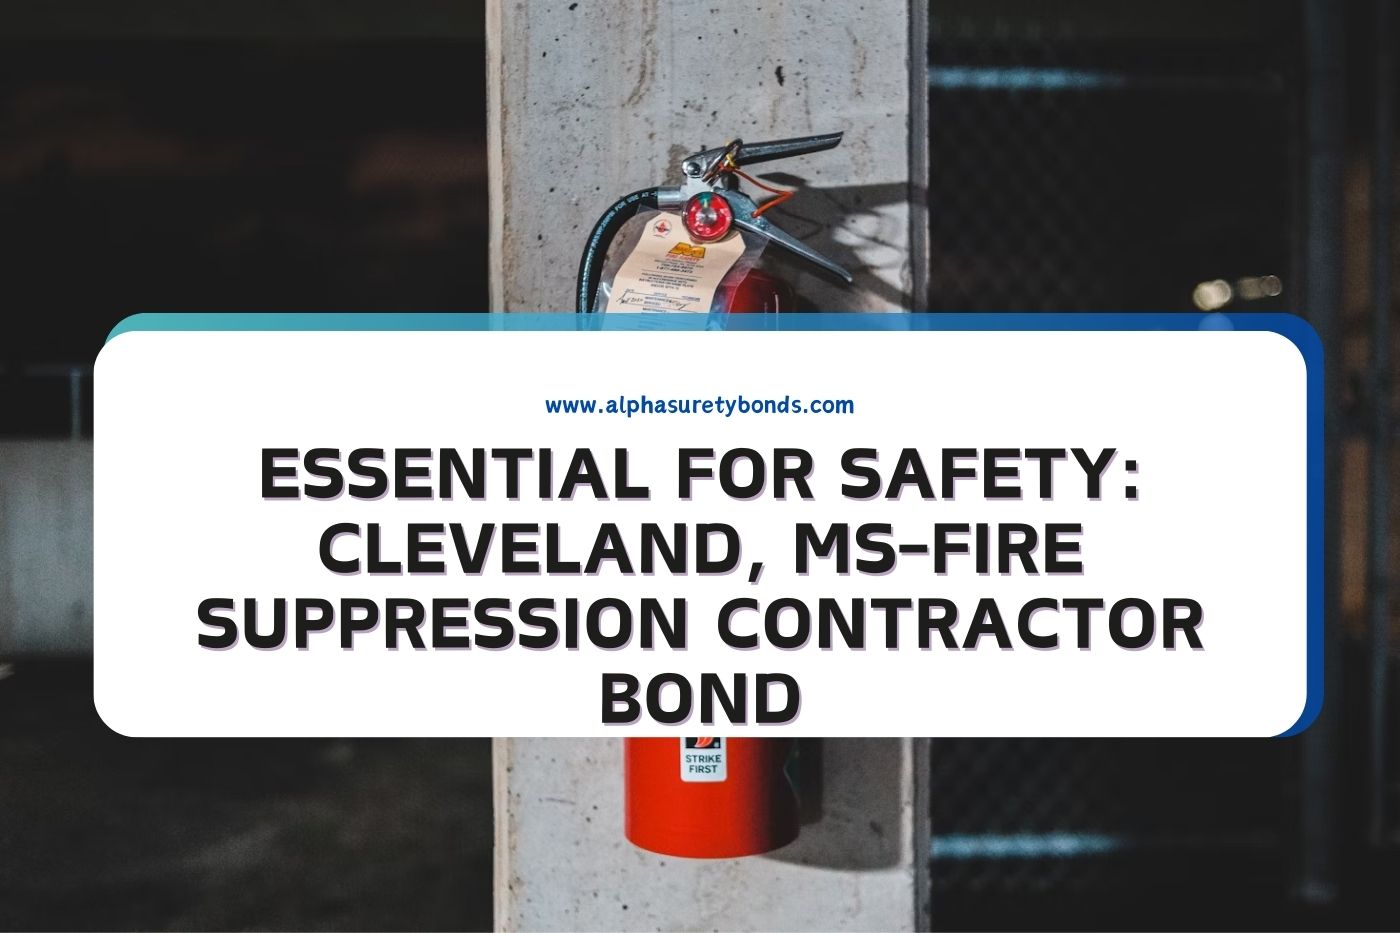 Essential for Safety: Cleveland, MS-Fire Suppression Contractor Bond